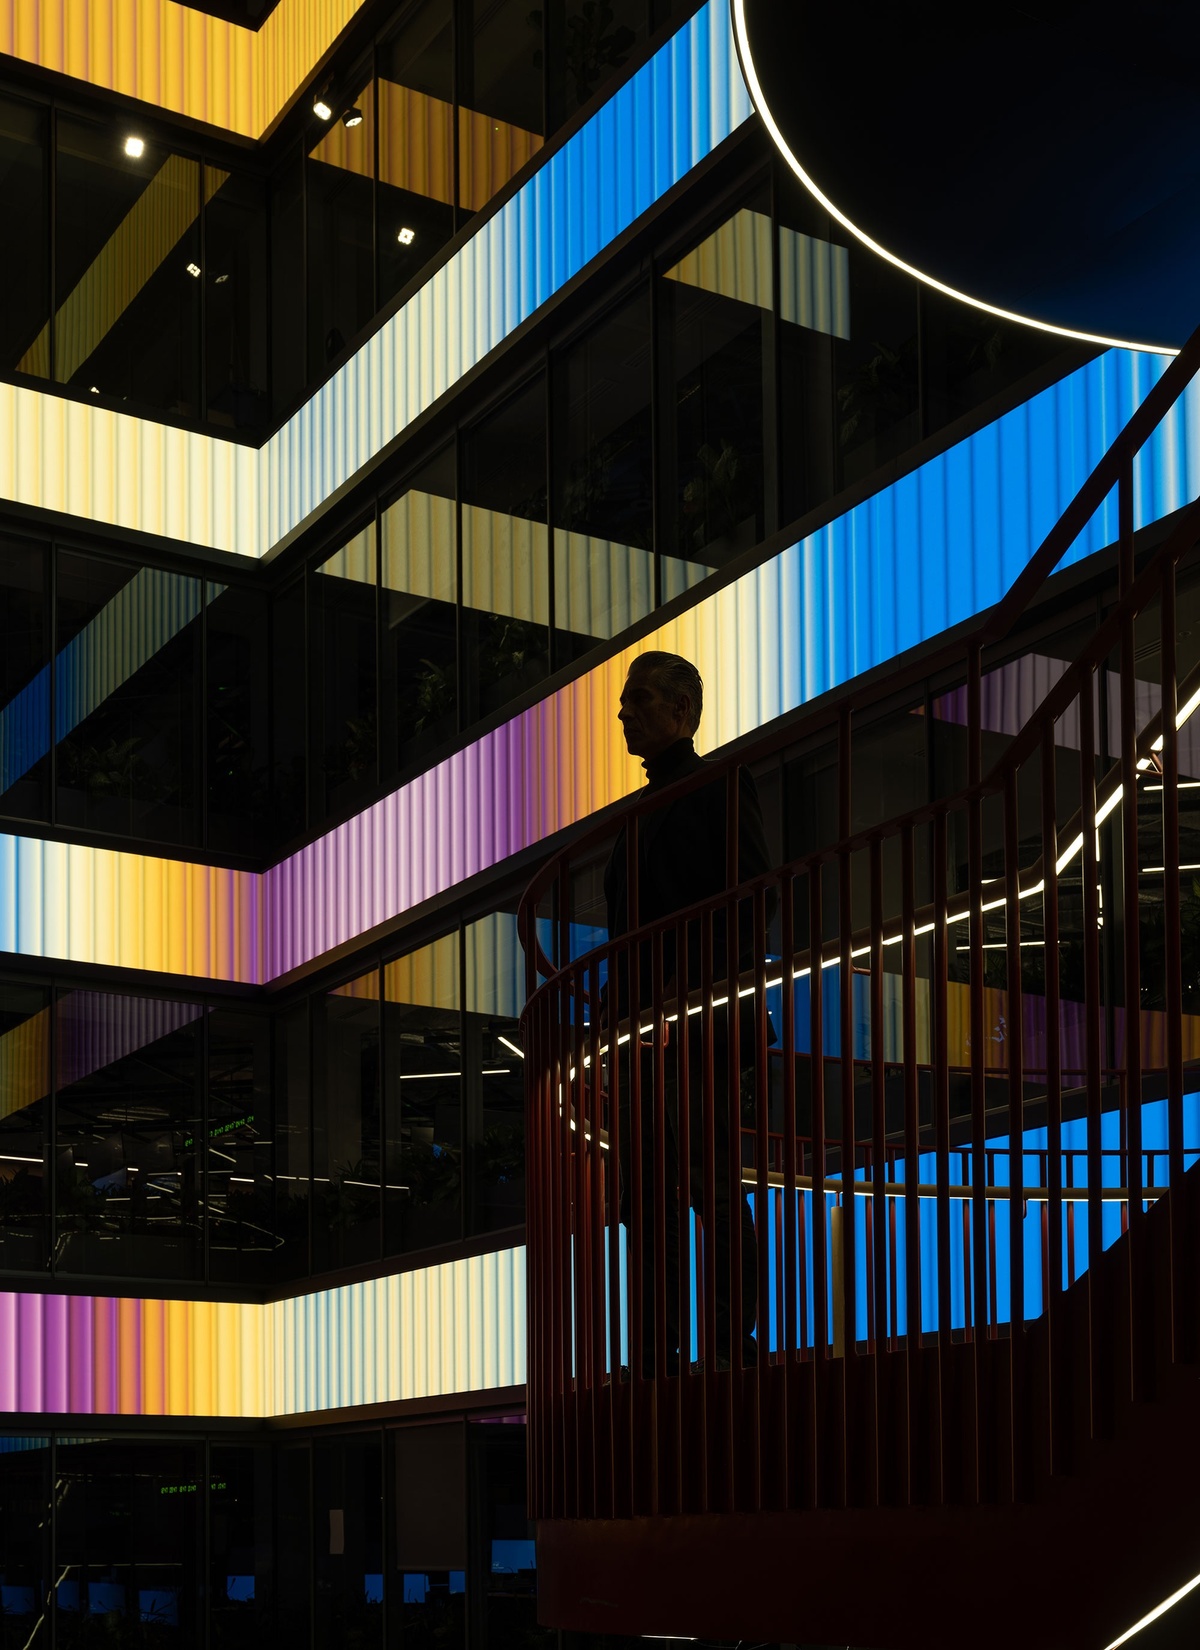 Person overlooking atrium space with four rows of horizontal LED screens behind him, lit with a yellow, purple, blue and white gradient